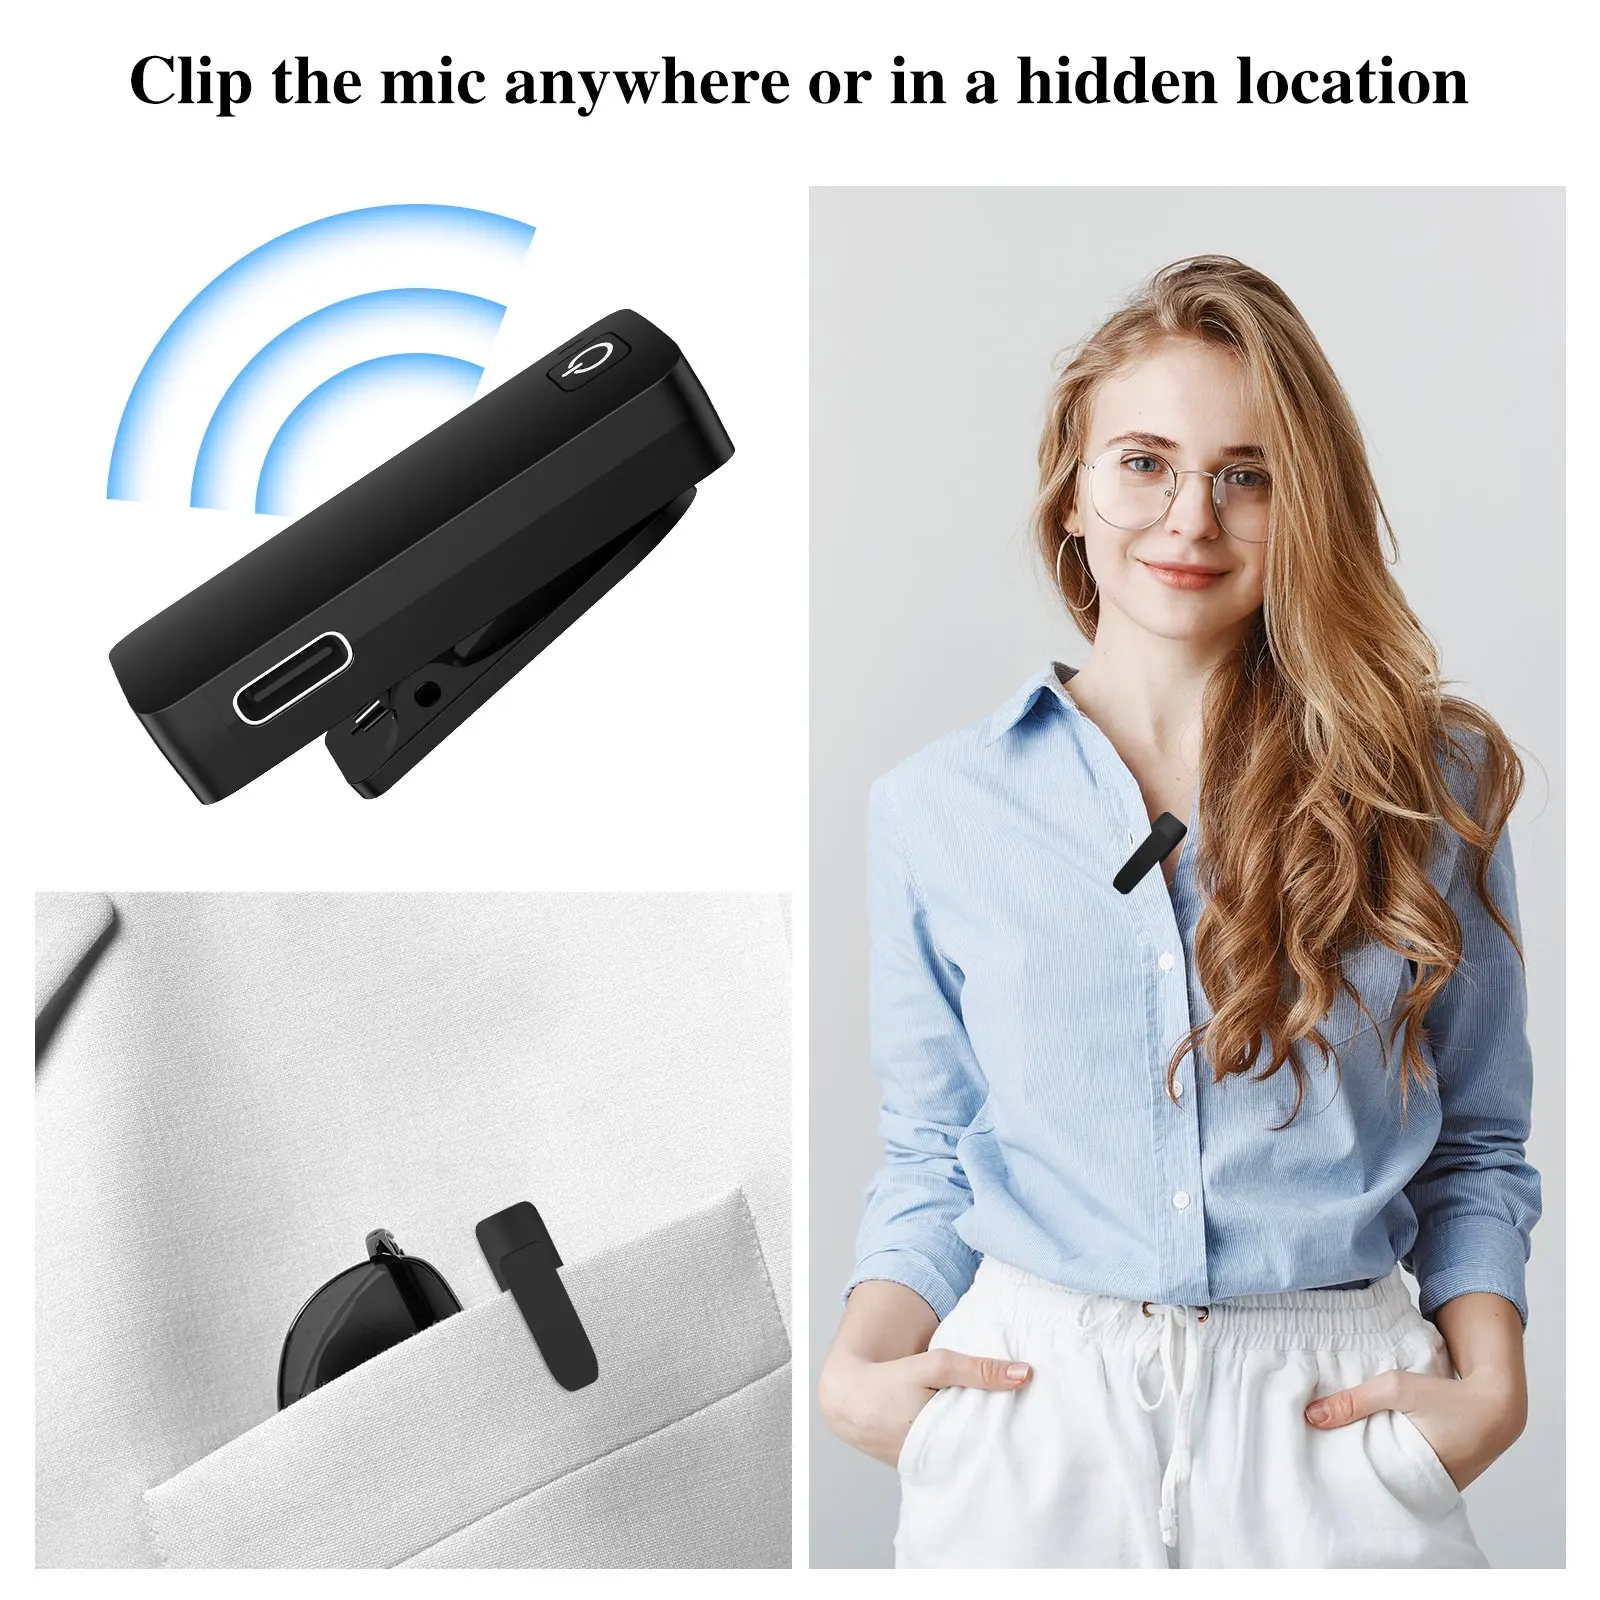 Wireless Microphone,8H Lavalier Lapel Mini Portable Hidden Microphone for Video Recording,Vlog,YouTube, Interview,Live Stream enlarge